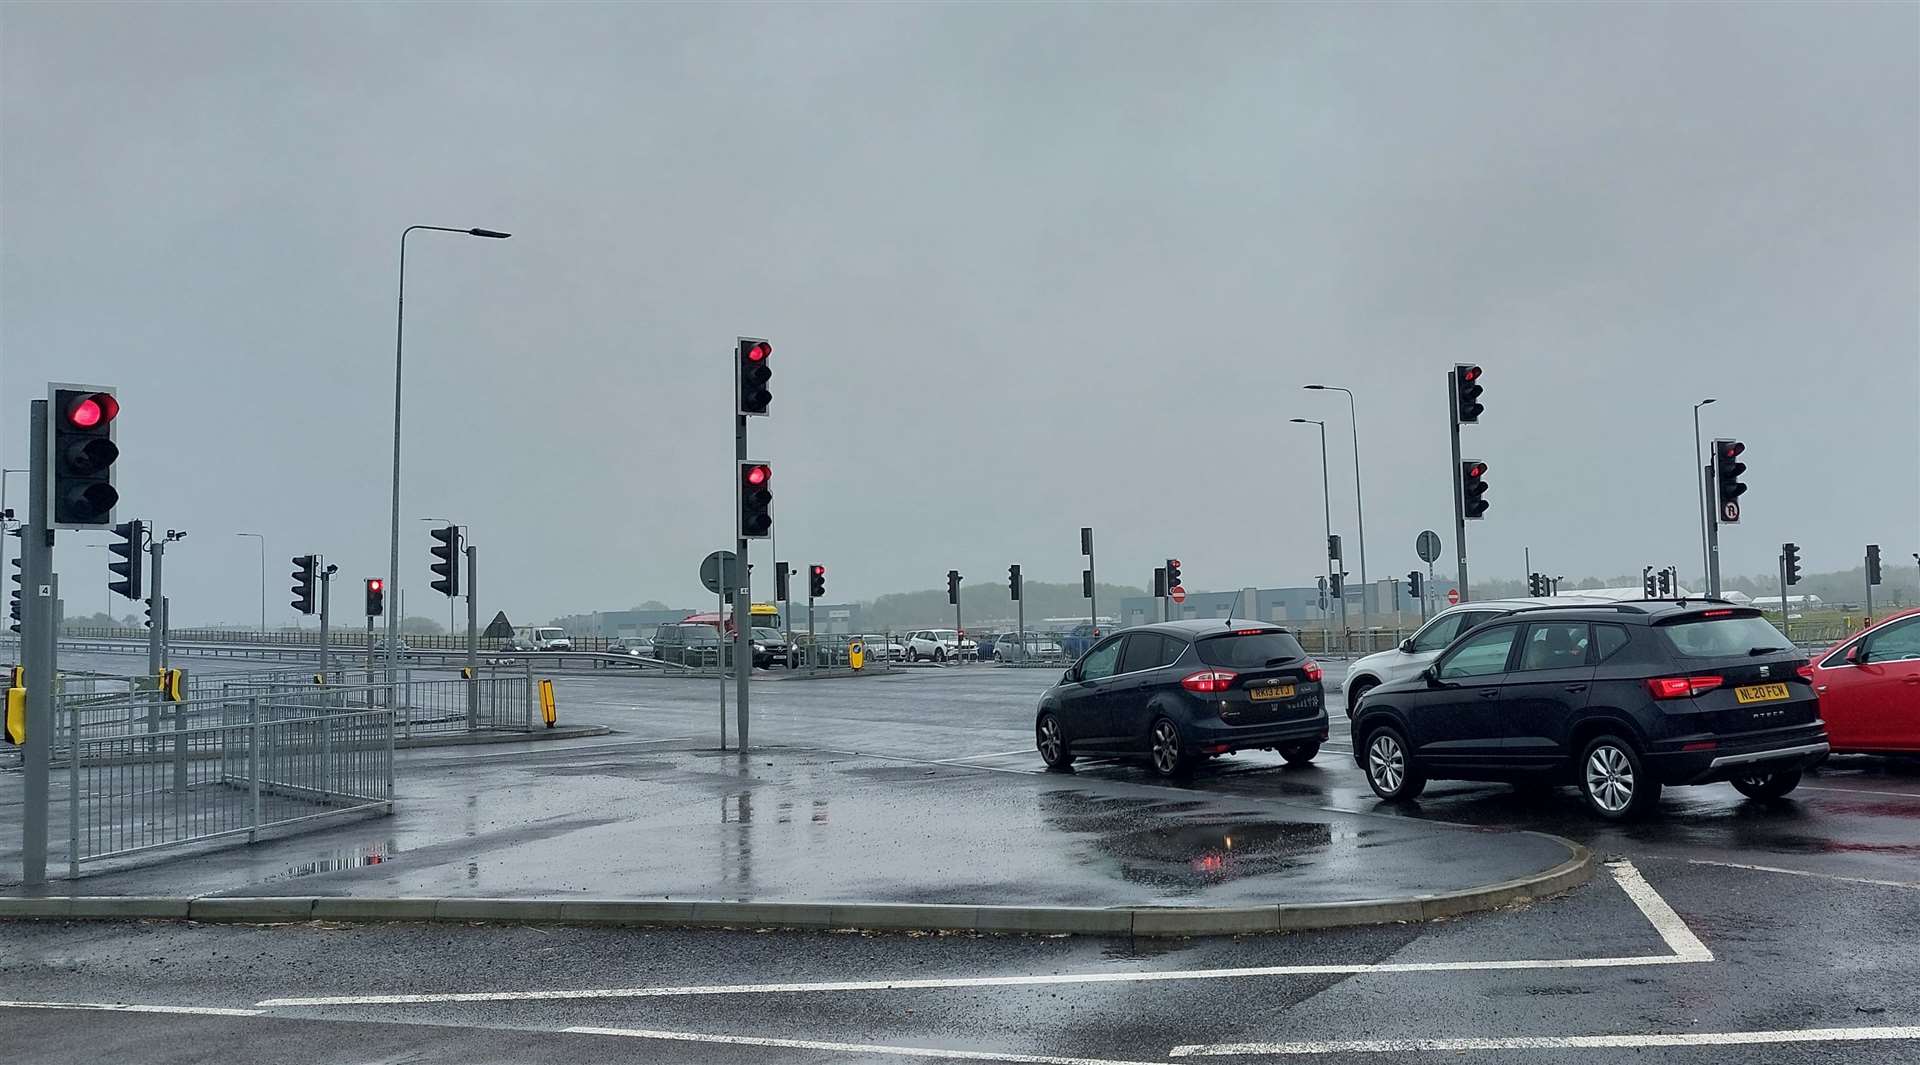 Four-way traffic lights have replaced the Orbital Park roundabout